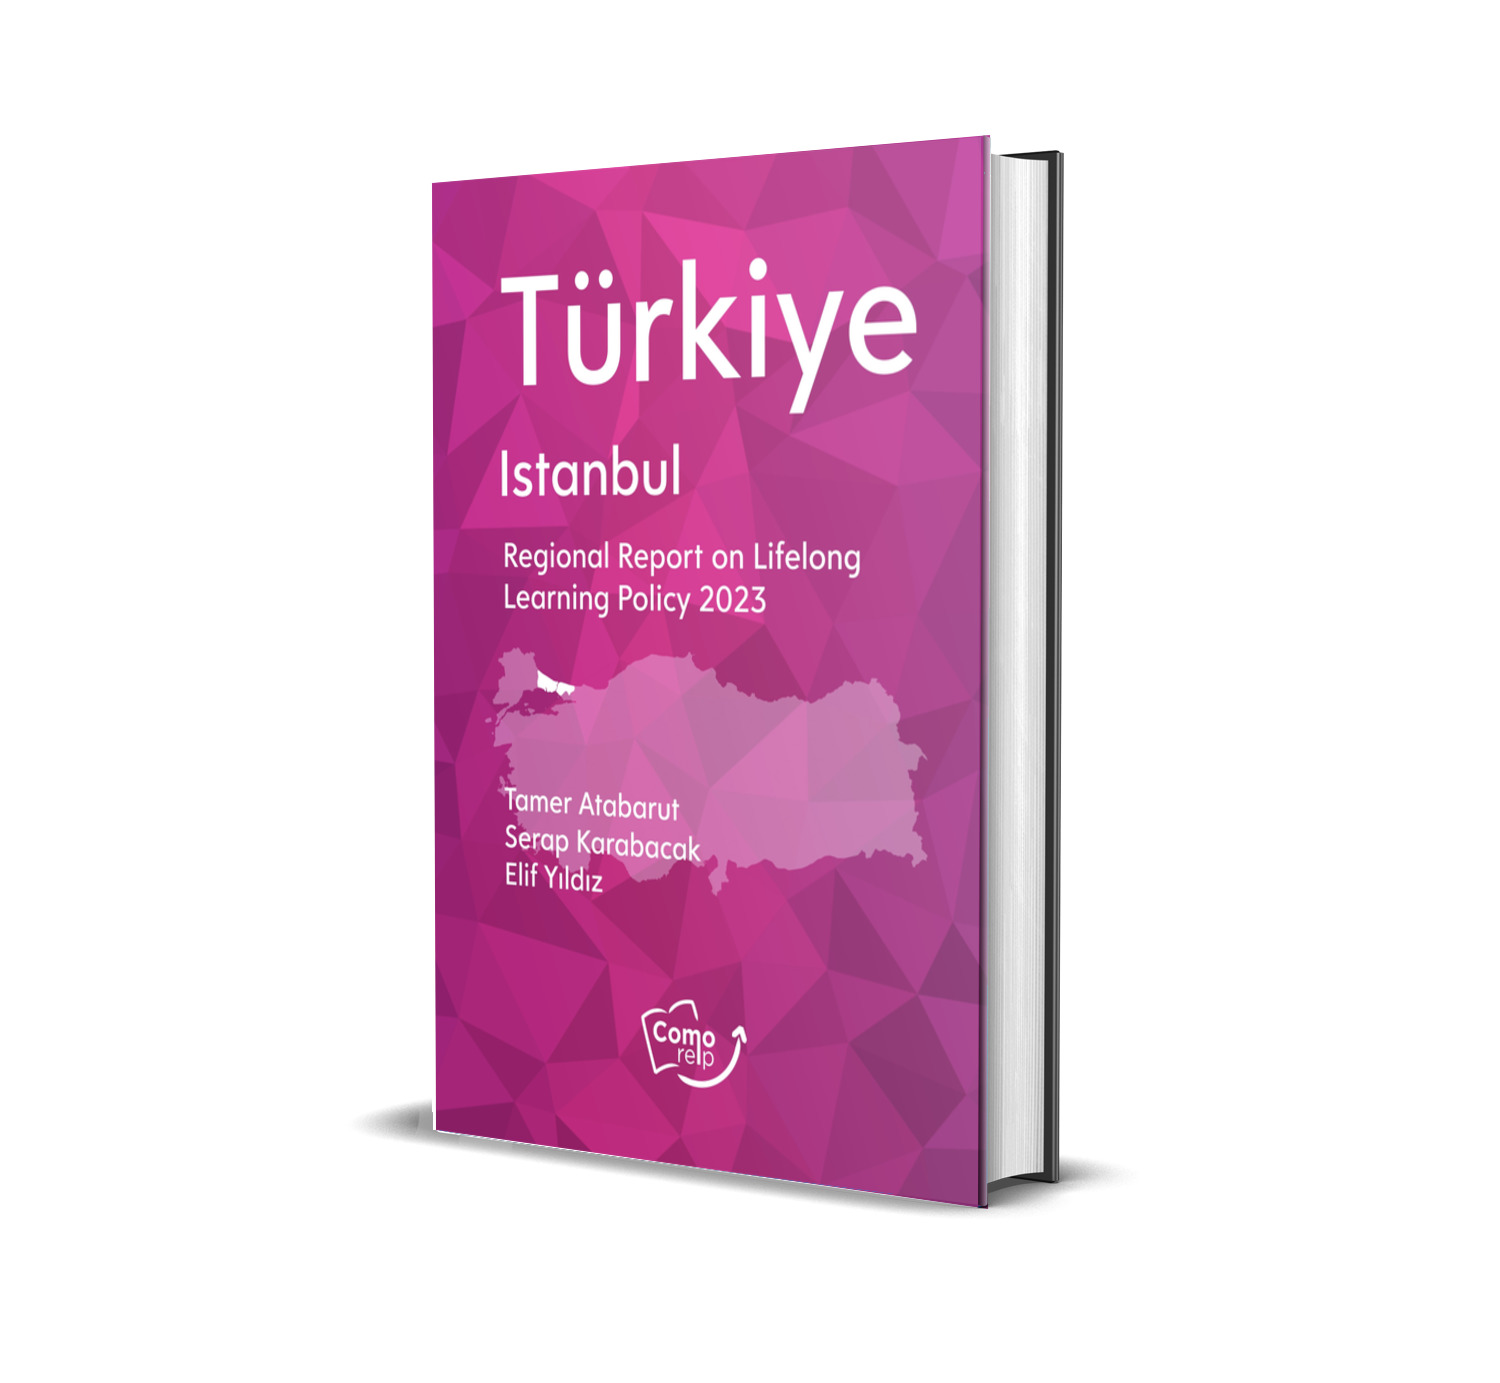 Lifelong Learning Policy in Istanbul